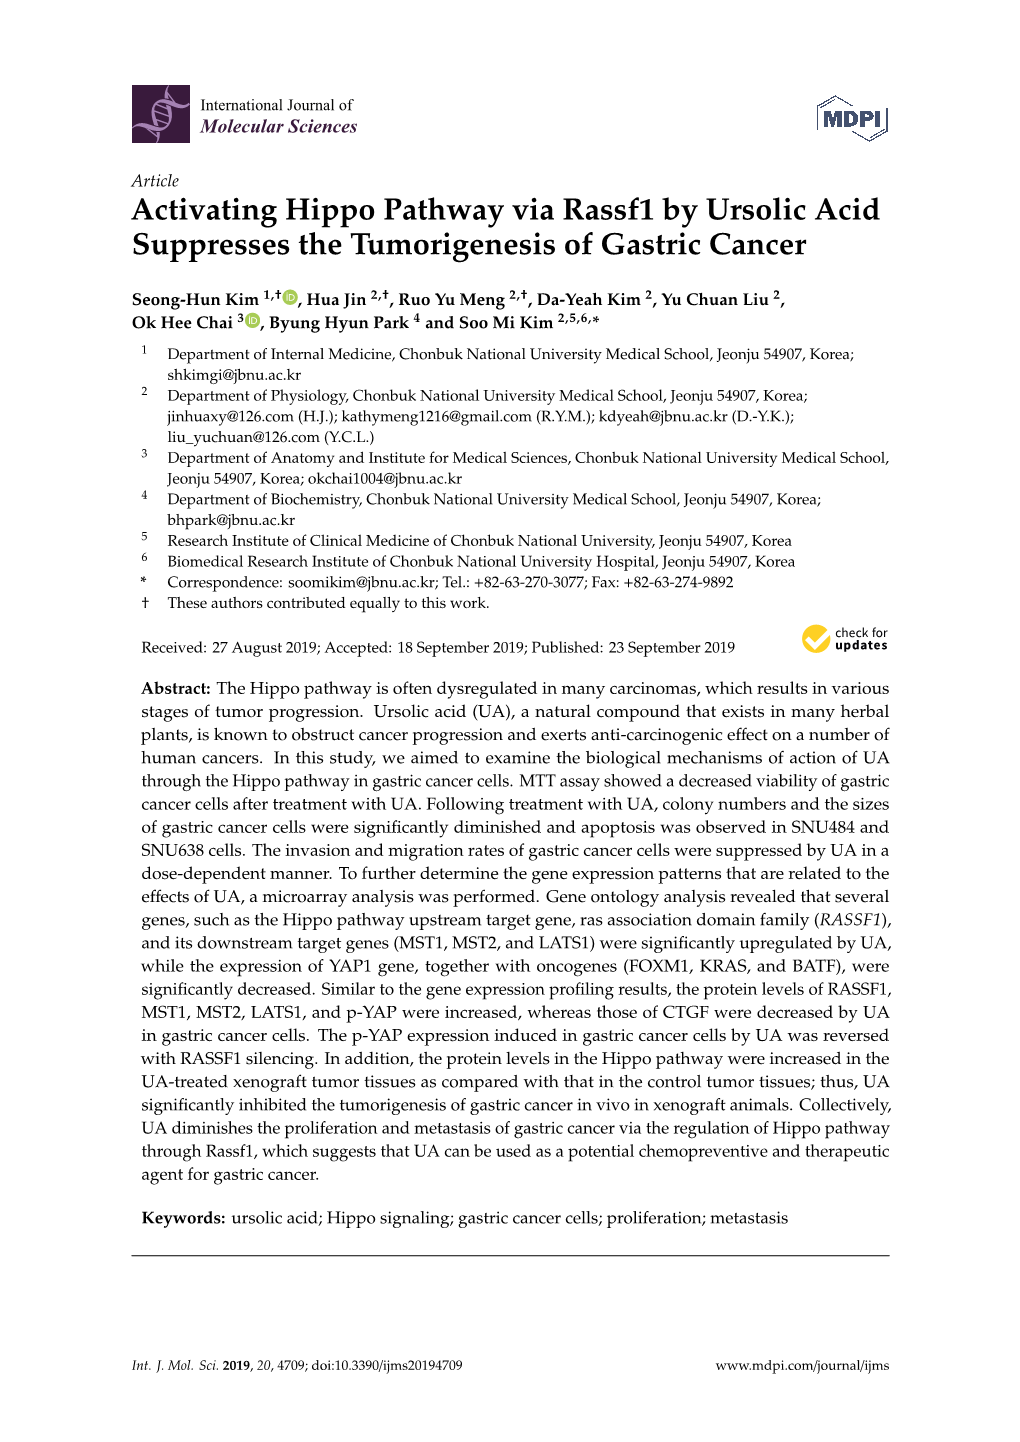 Activating Hippo Pathway Via Rassf1 by Ursolic Acid Suppresses the Tumorigenesis of Gastric Cancer